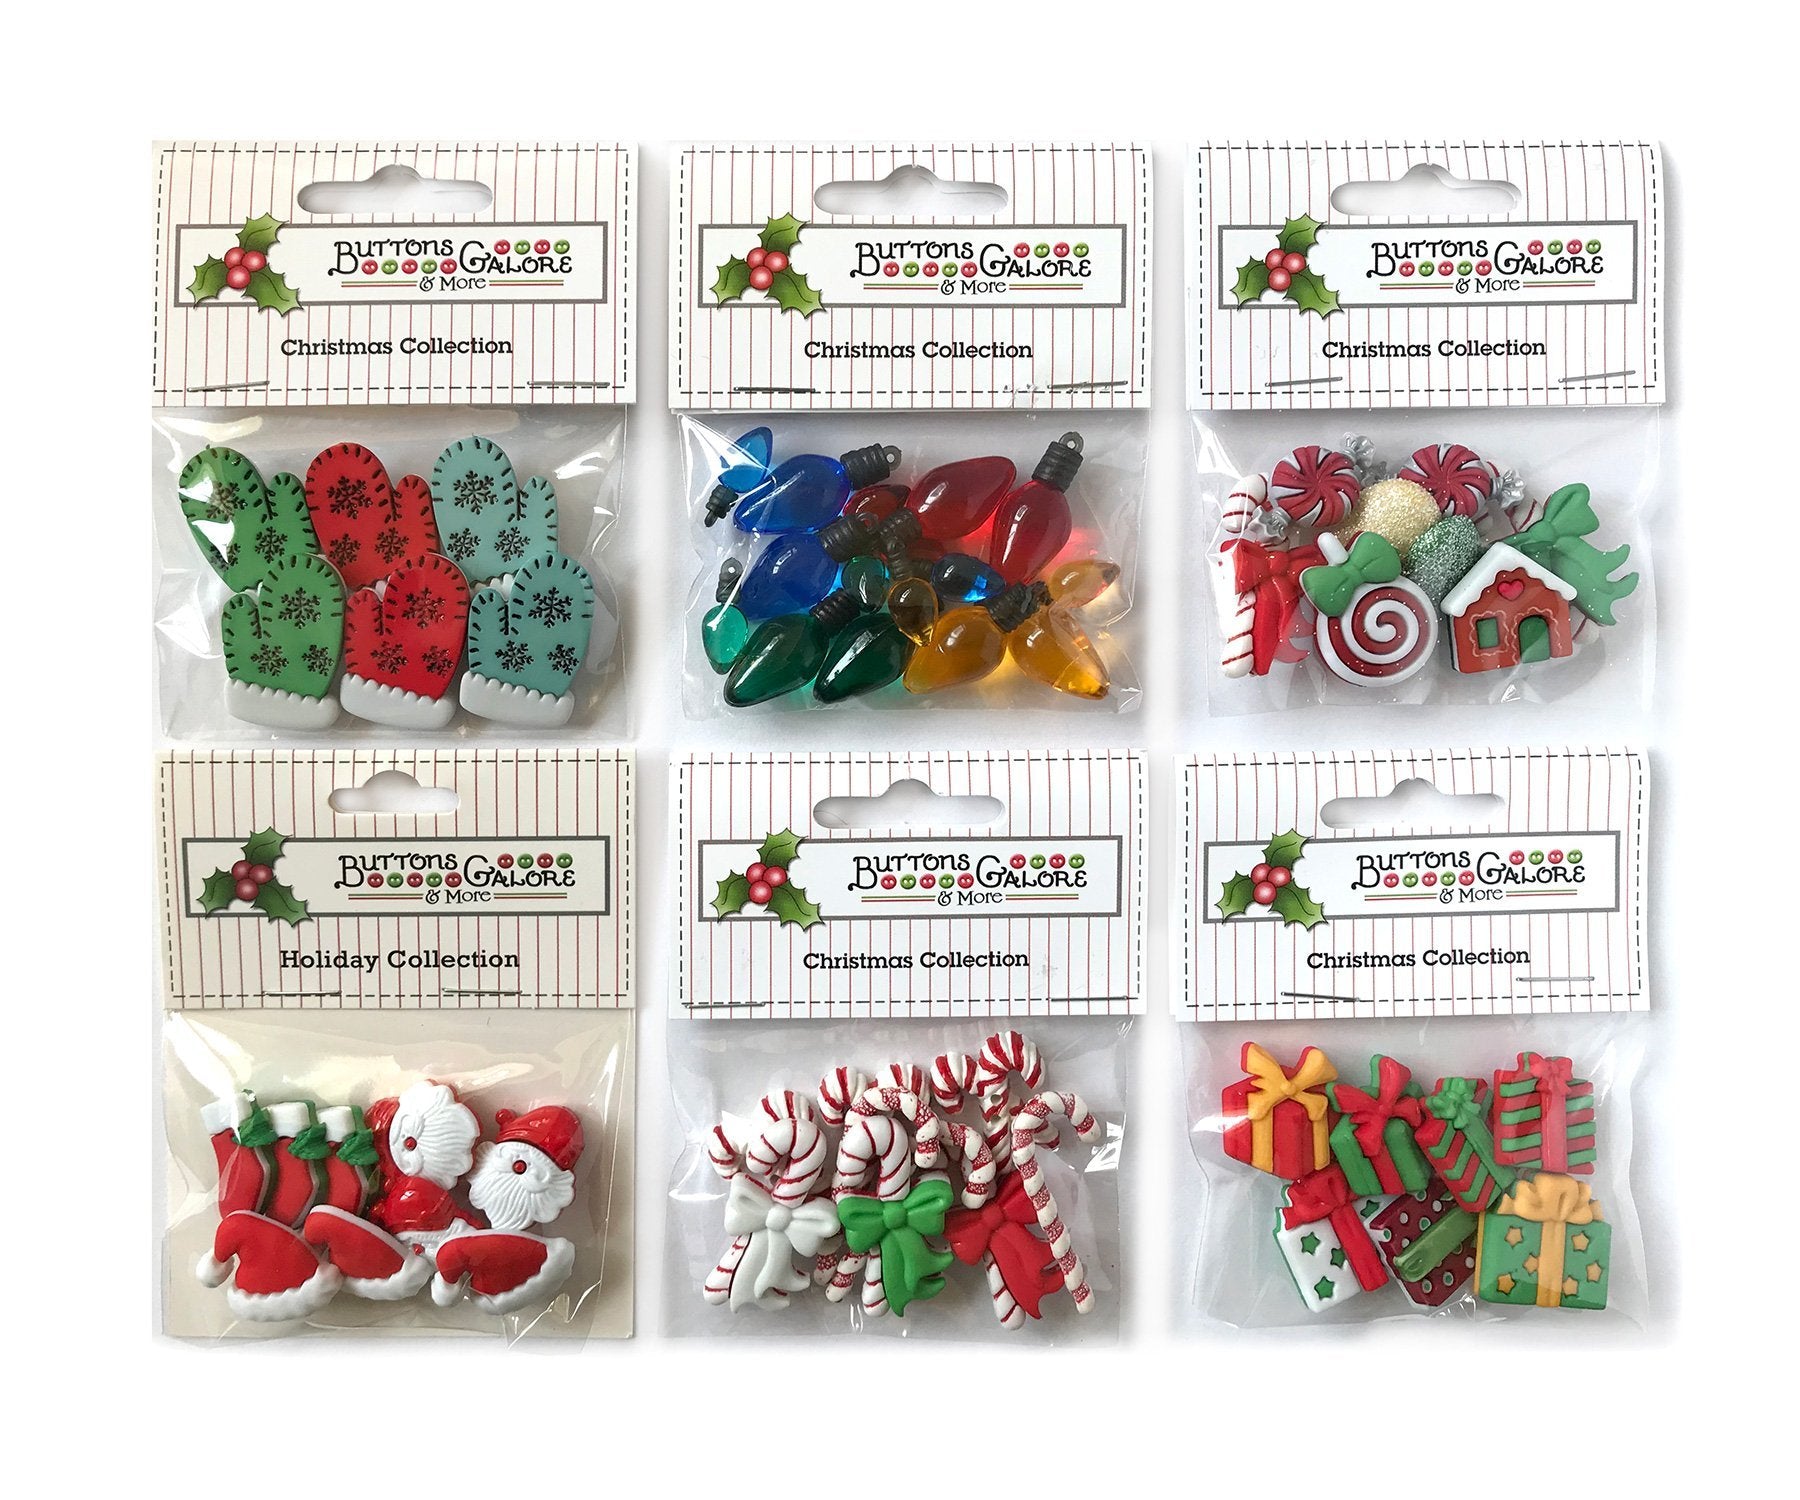 Christmas Group 2 - Set of 6 - Buttons Galore and More